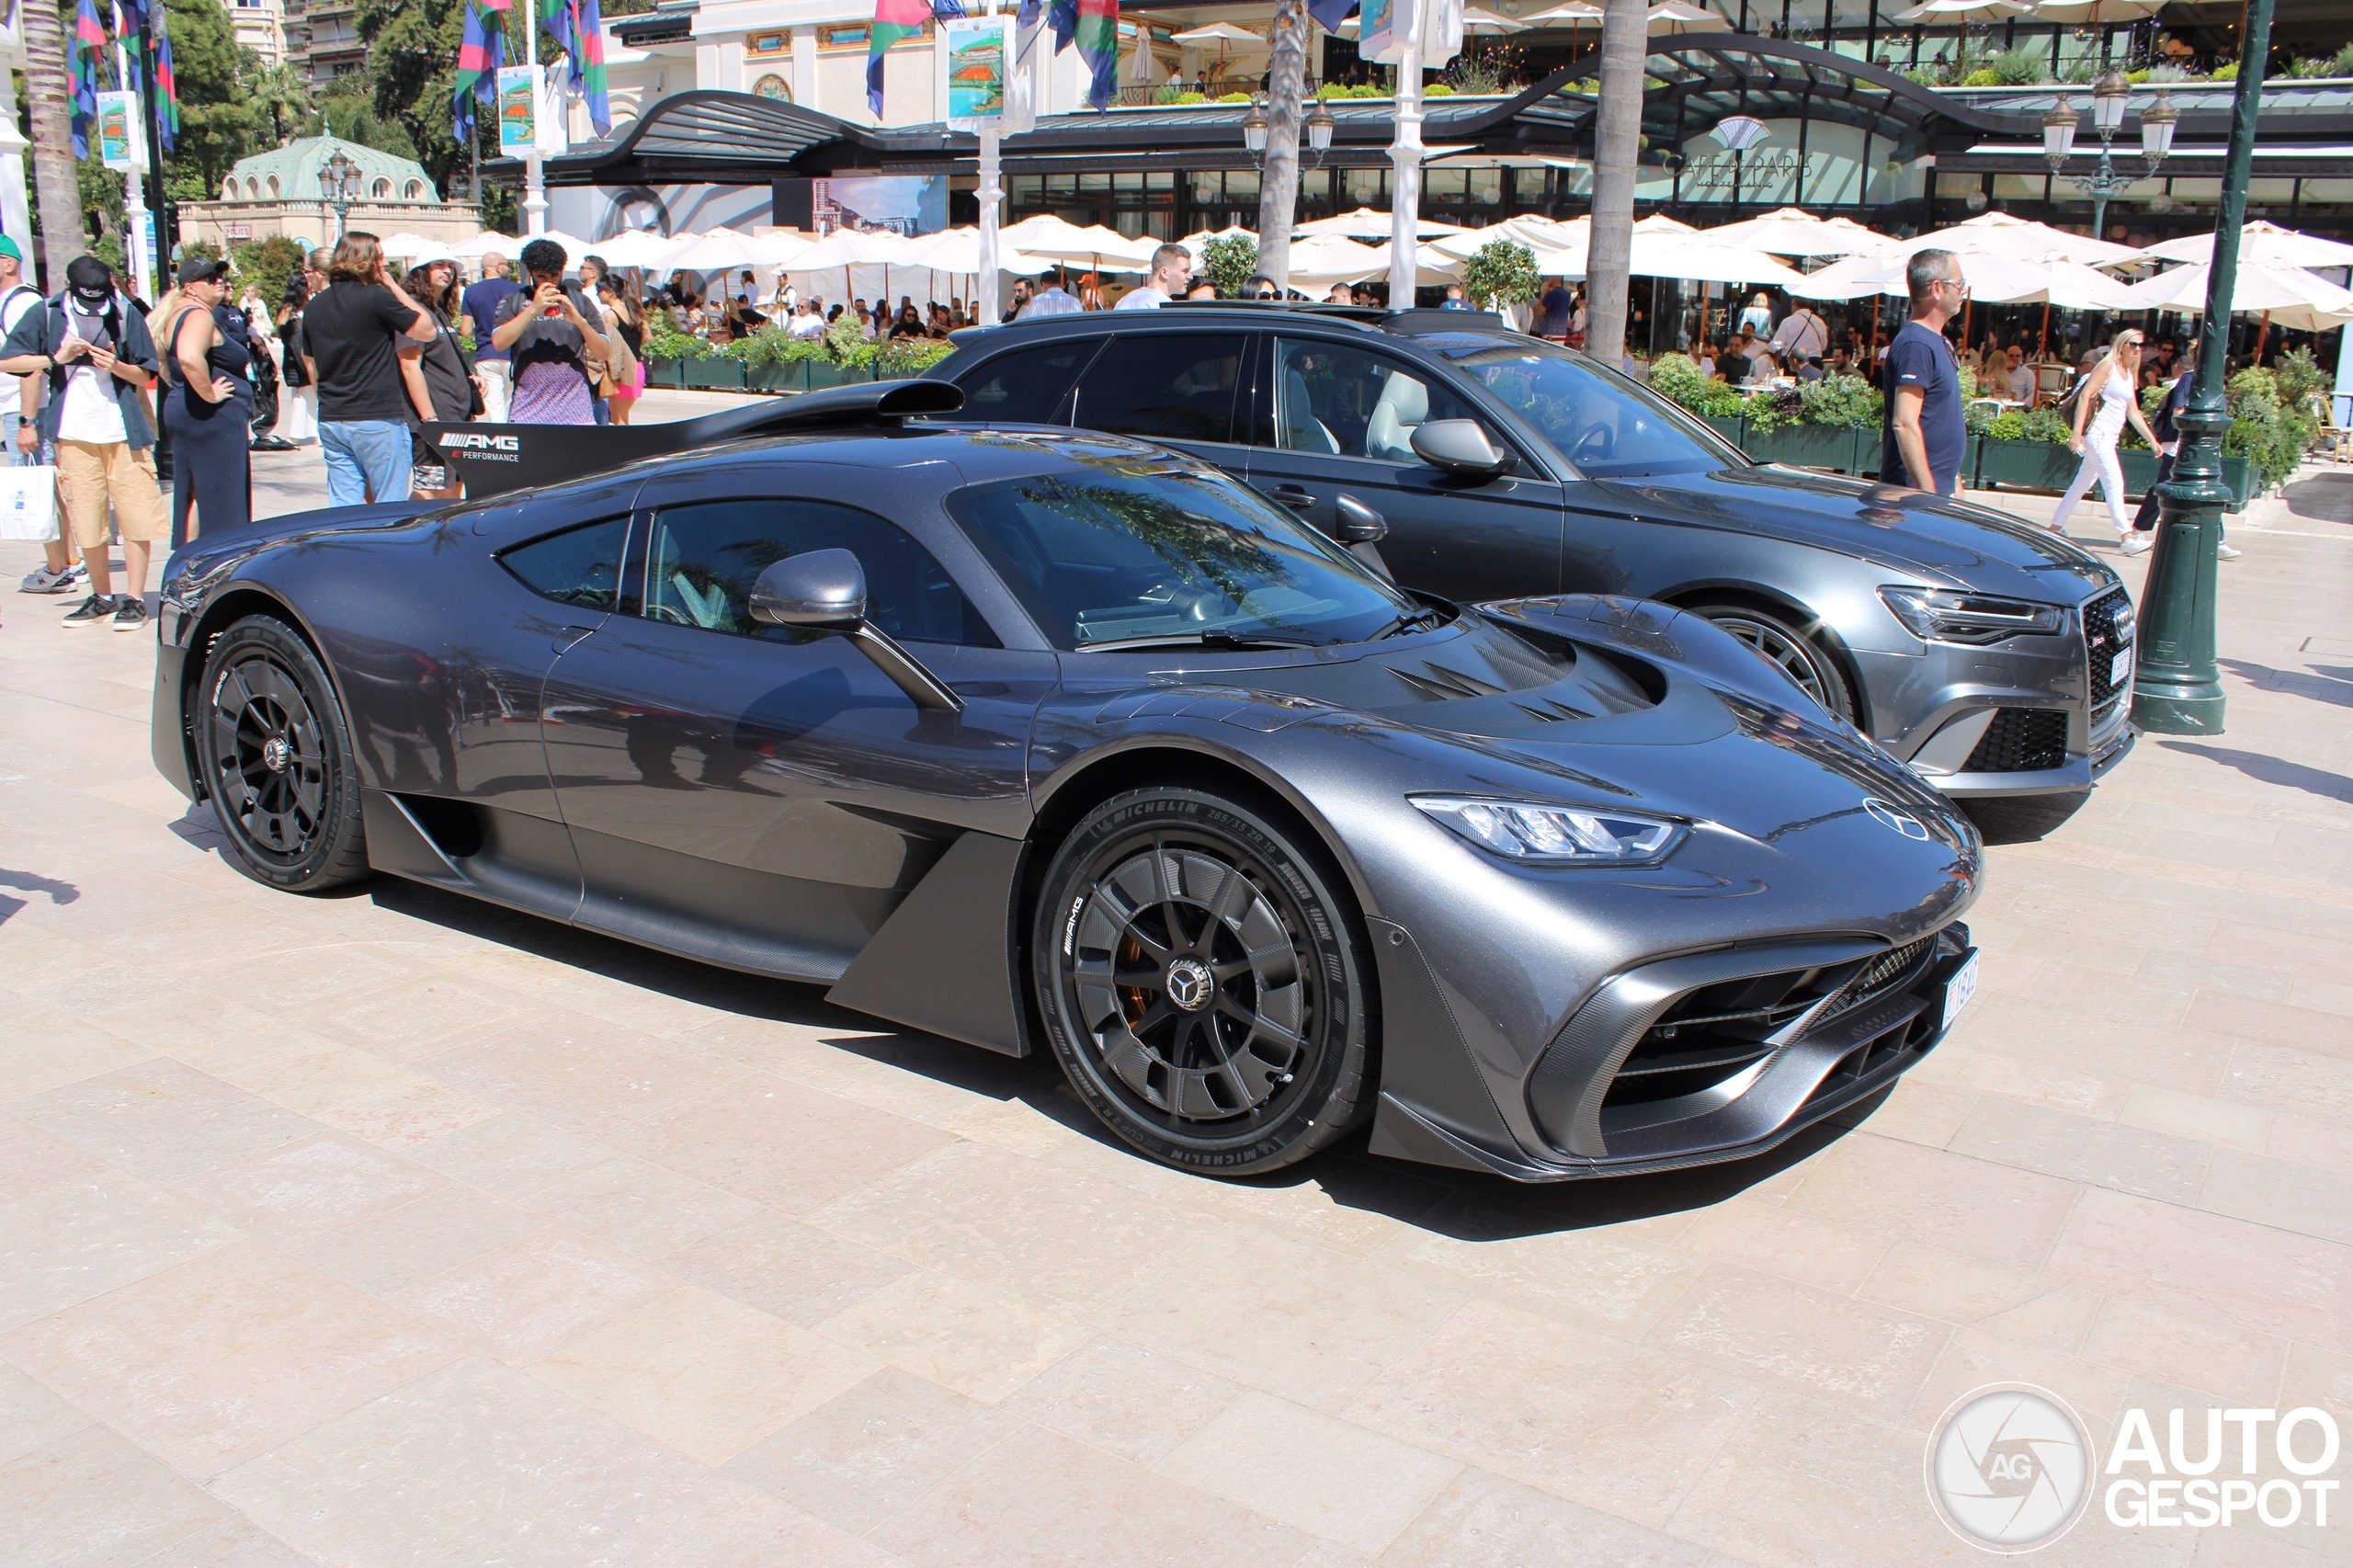 This is the First AMG One in Monaco